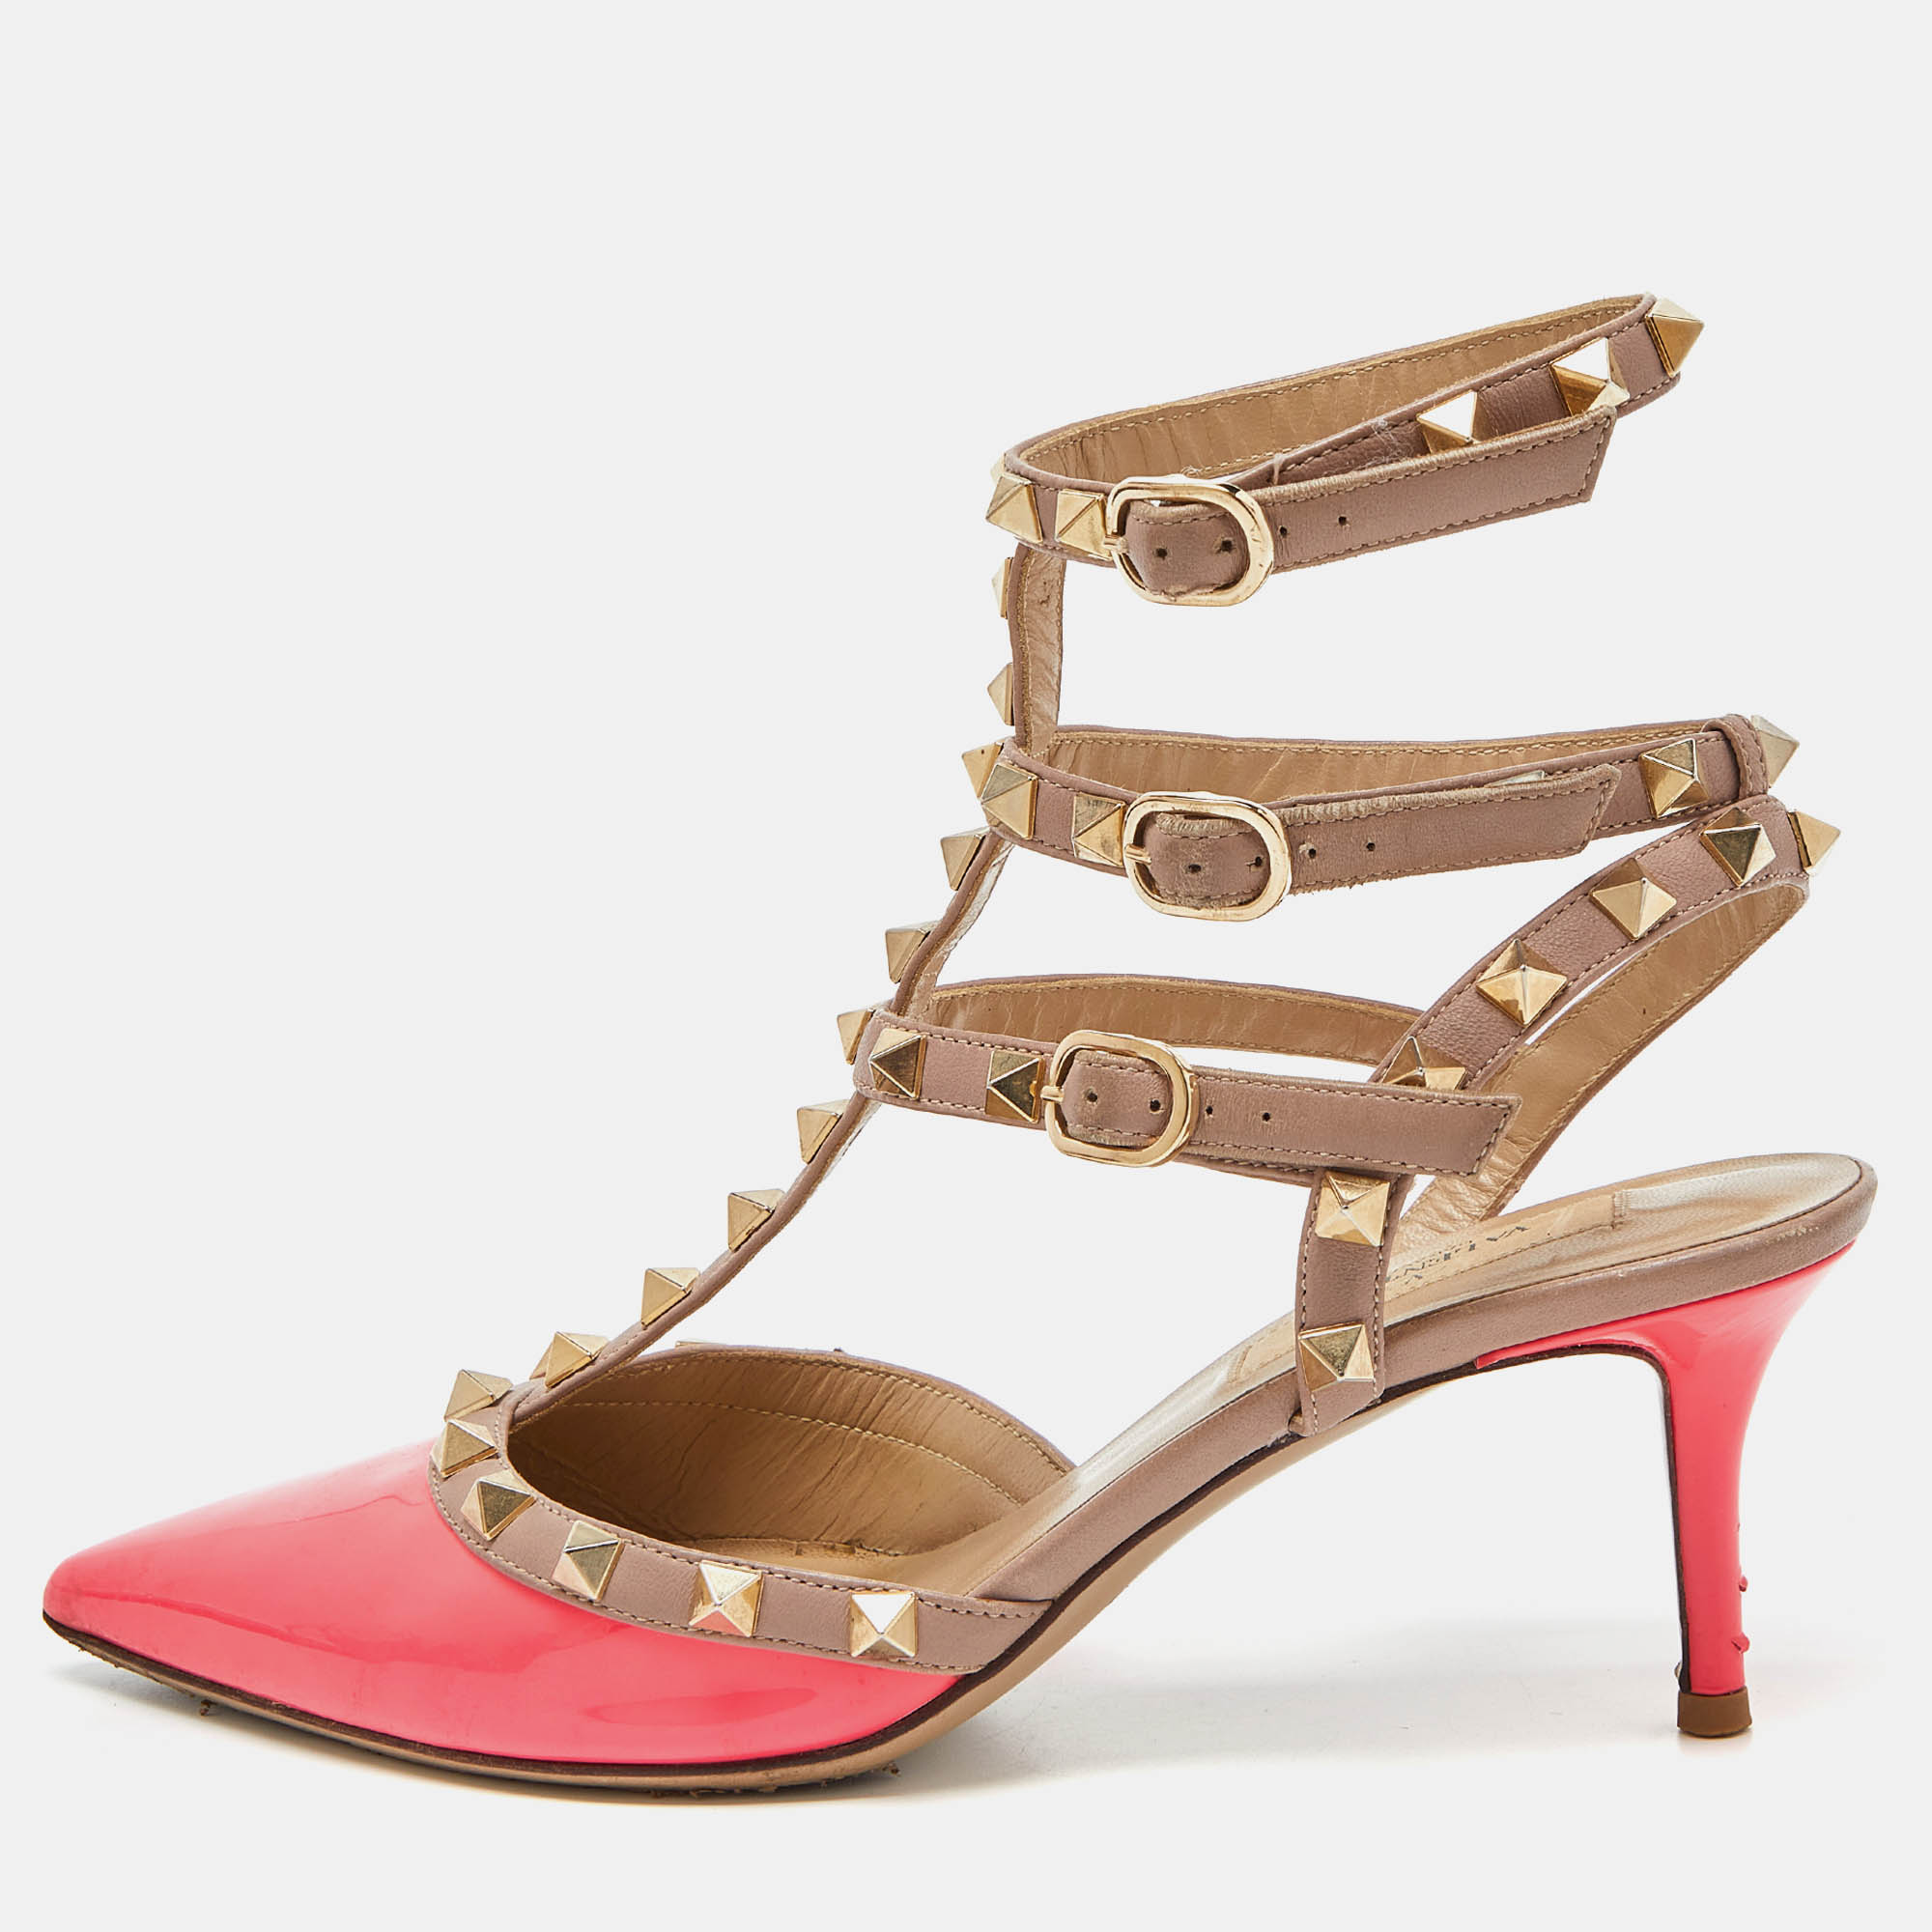 Valentino Pink/Beige Leather And Patent Rockstud Pumps Size 37.5